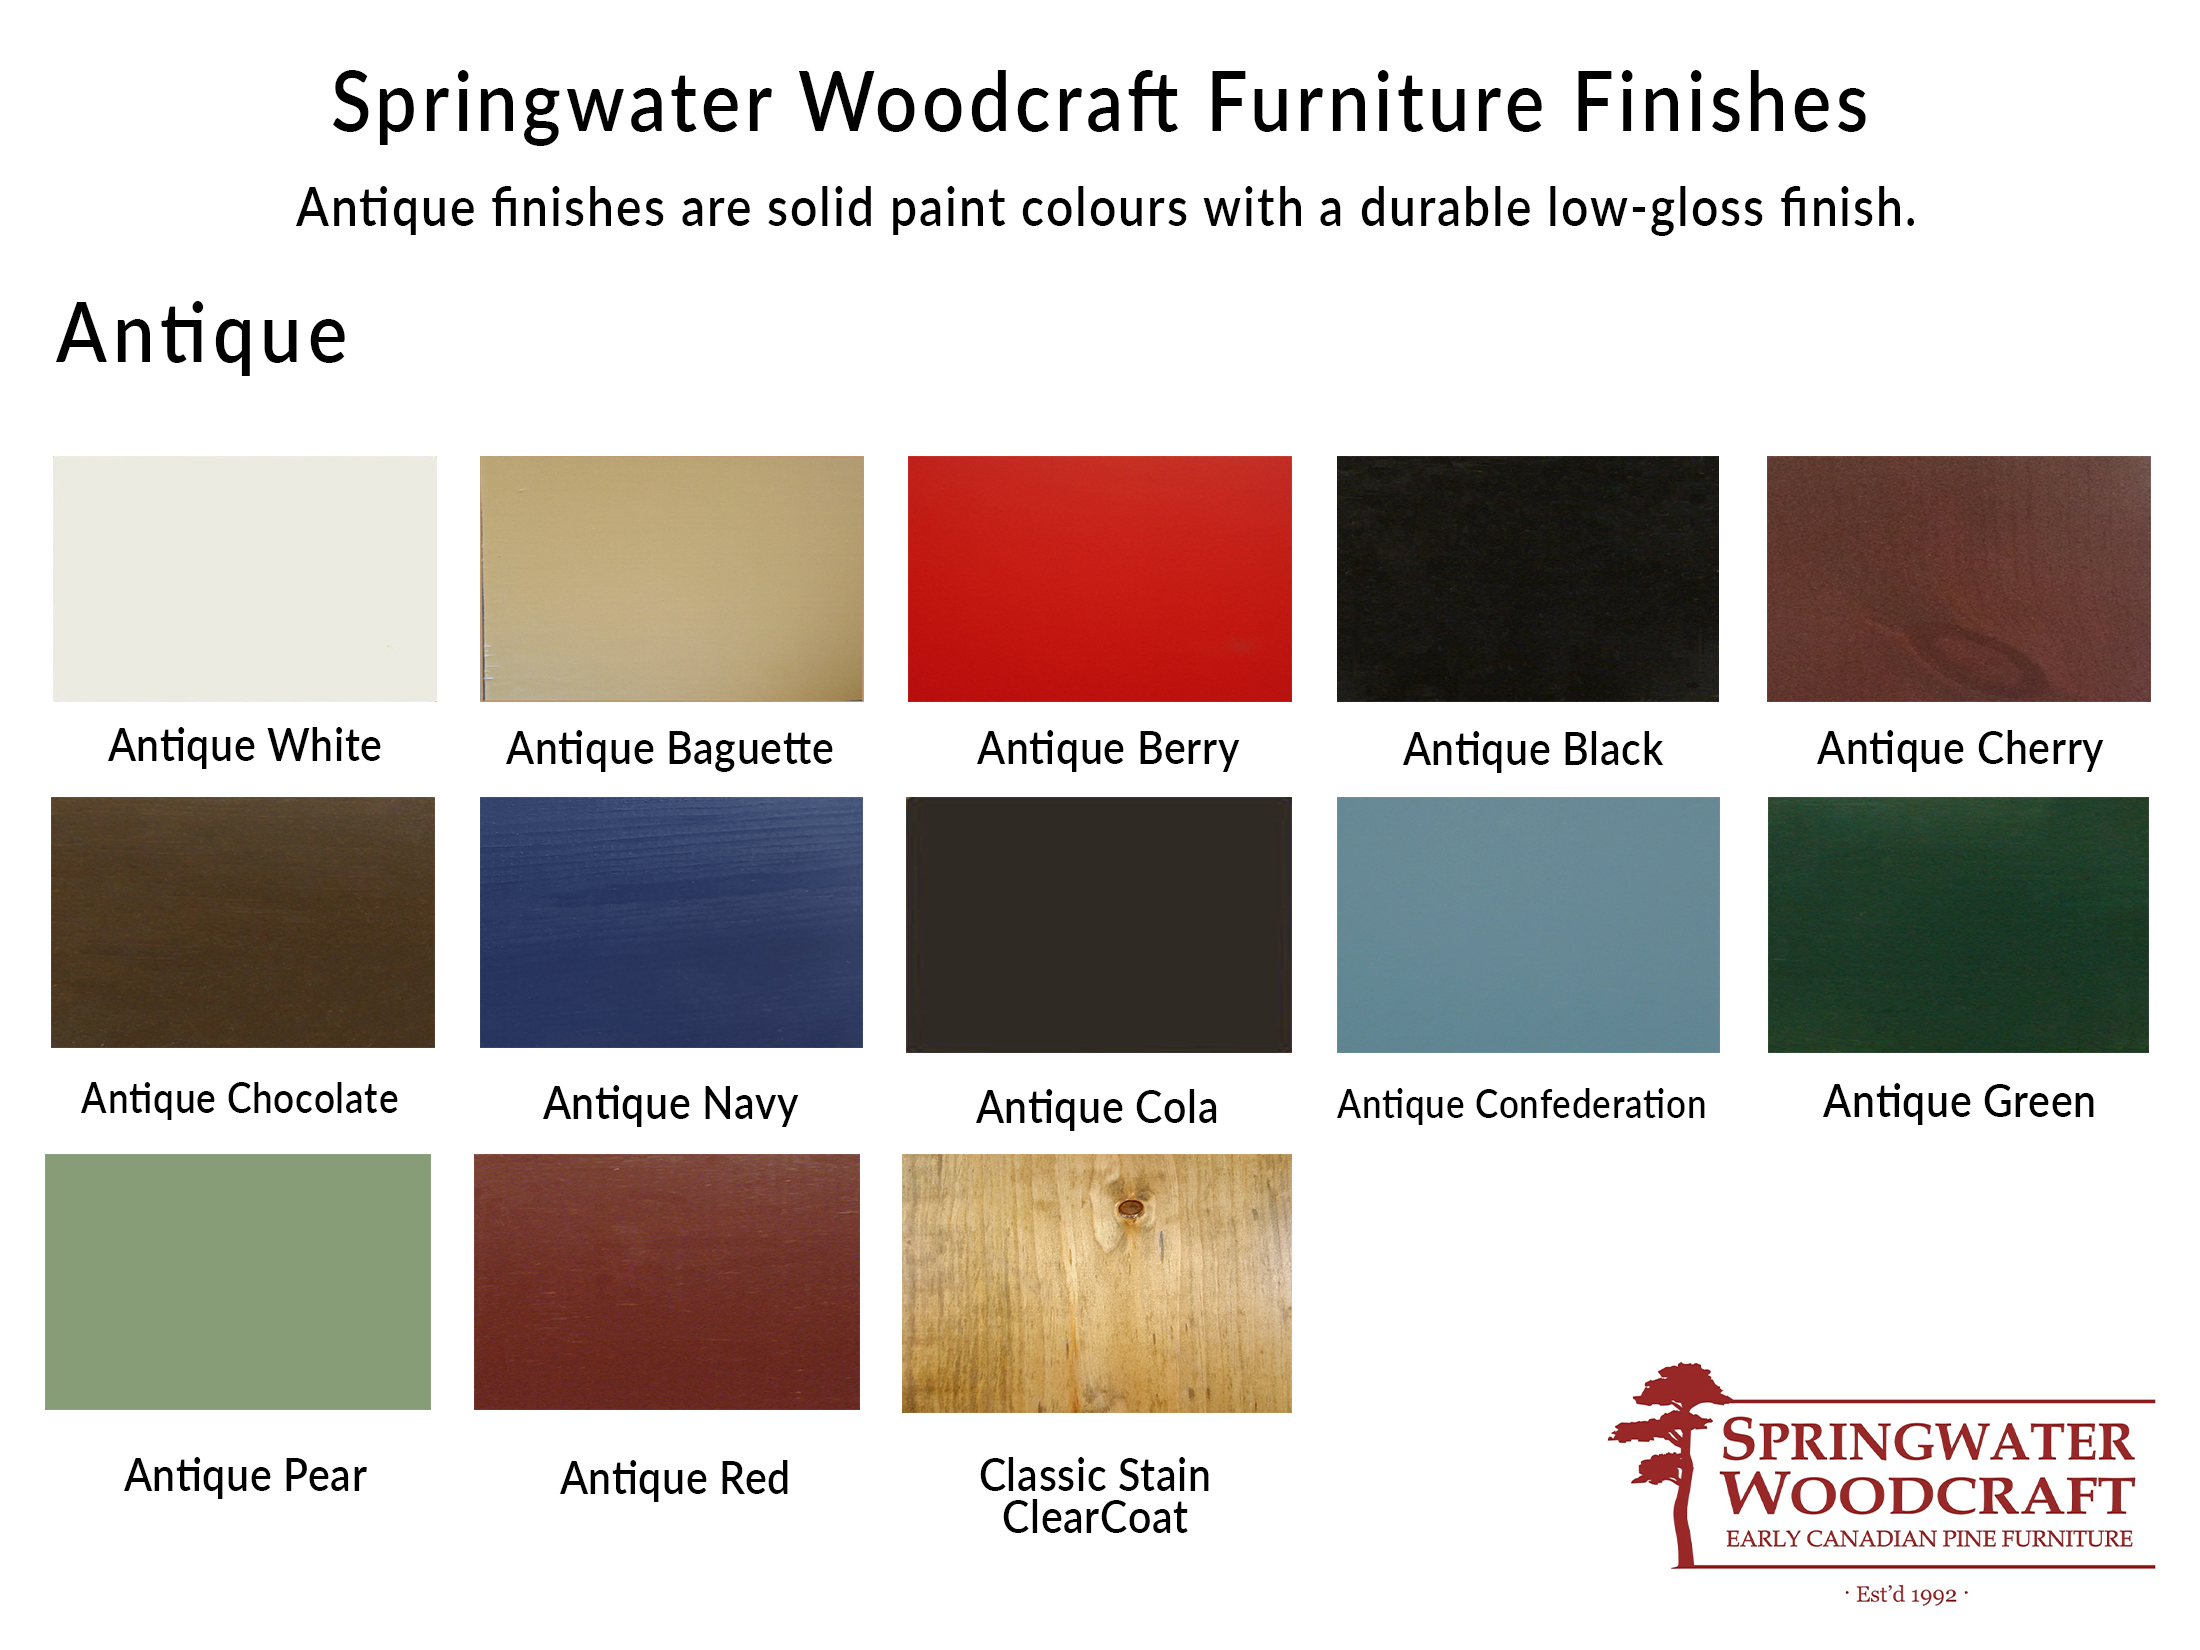 Antique Finishes for Springwater Woodcraft